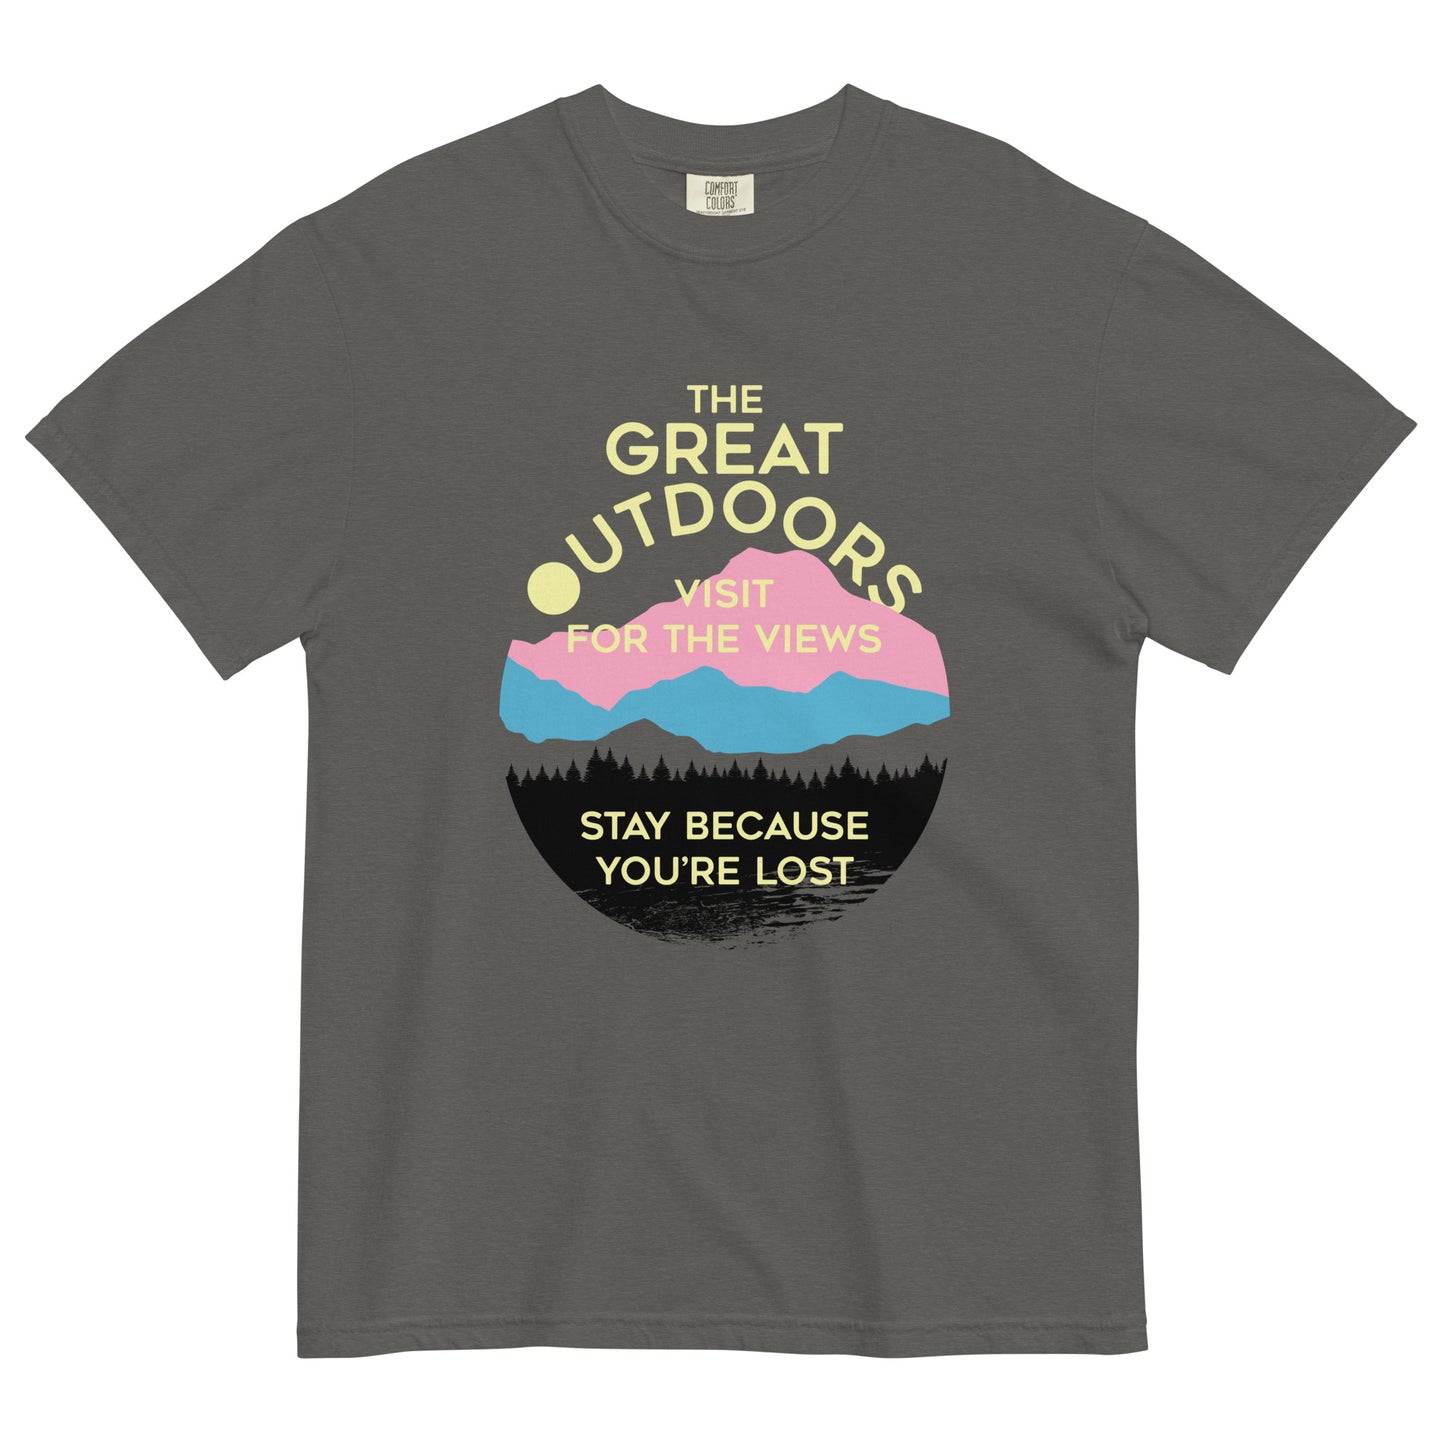 The Great Outdoors Men's Relaxed Fit Tee